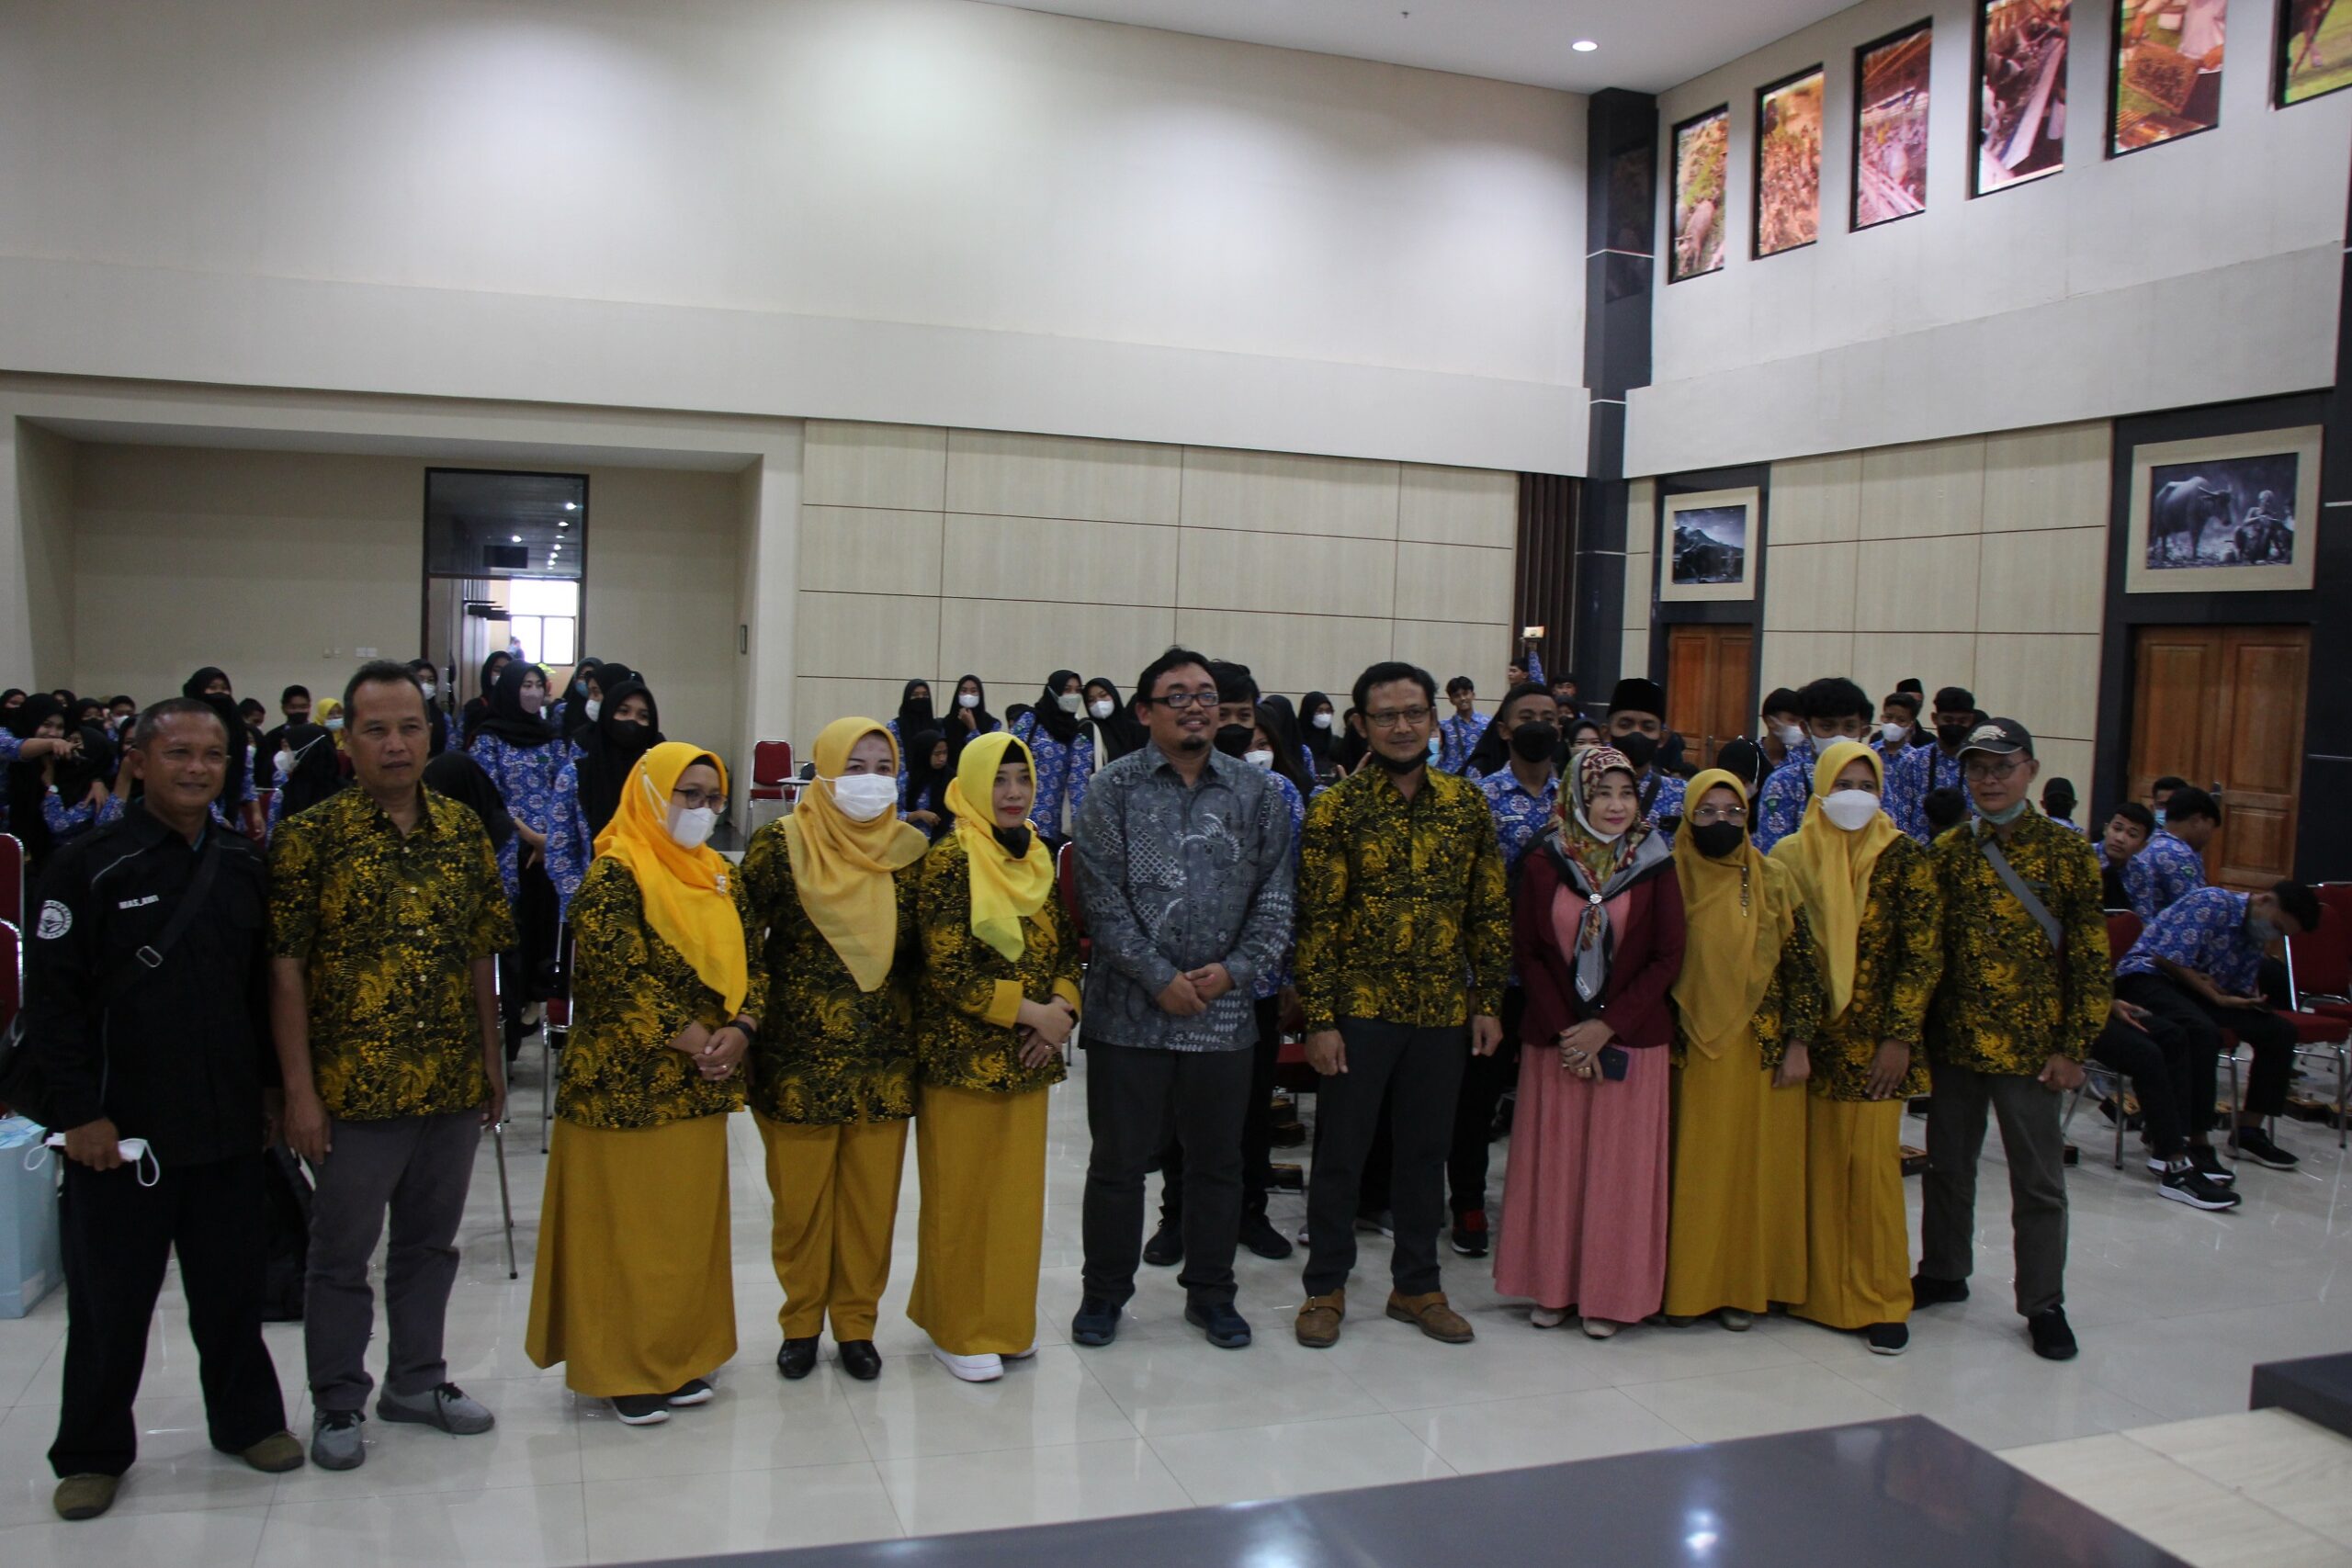 Fapet Welcomes the Visit of Students of SMA Negeri 1 Kalidawir, Tulungagung